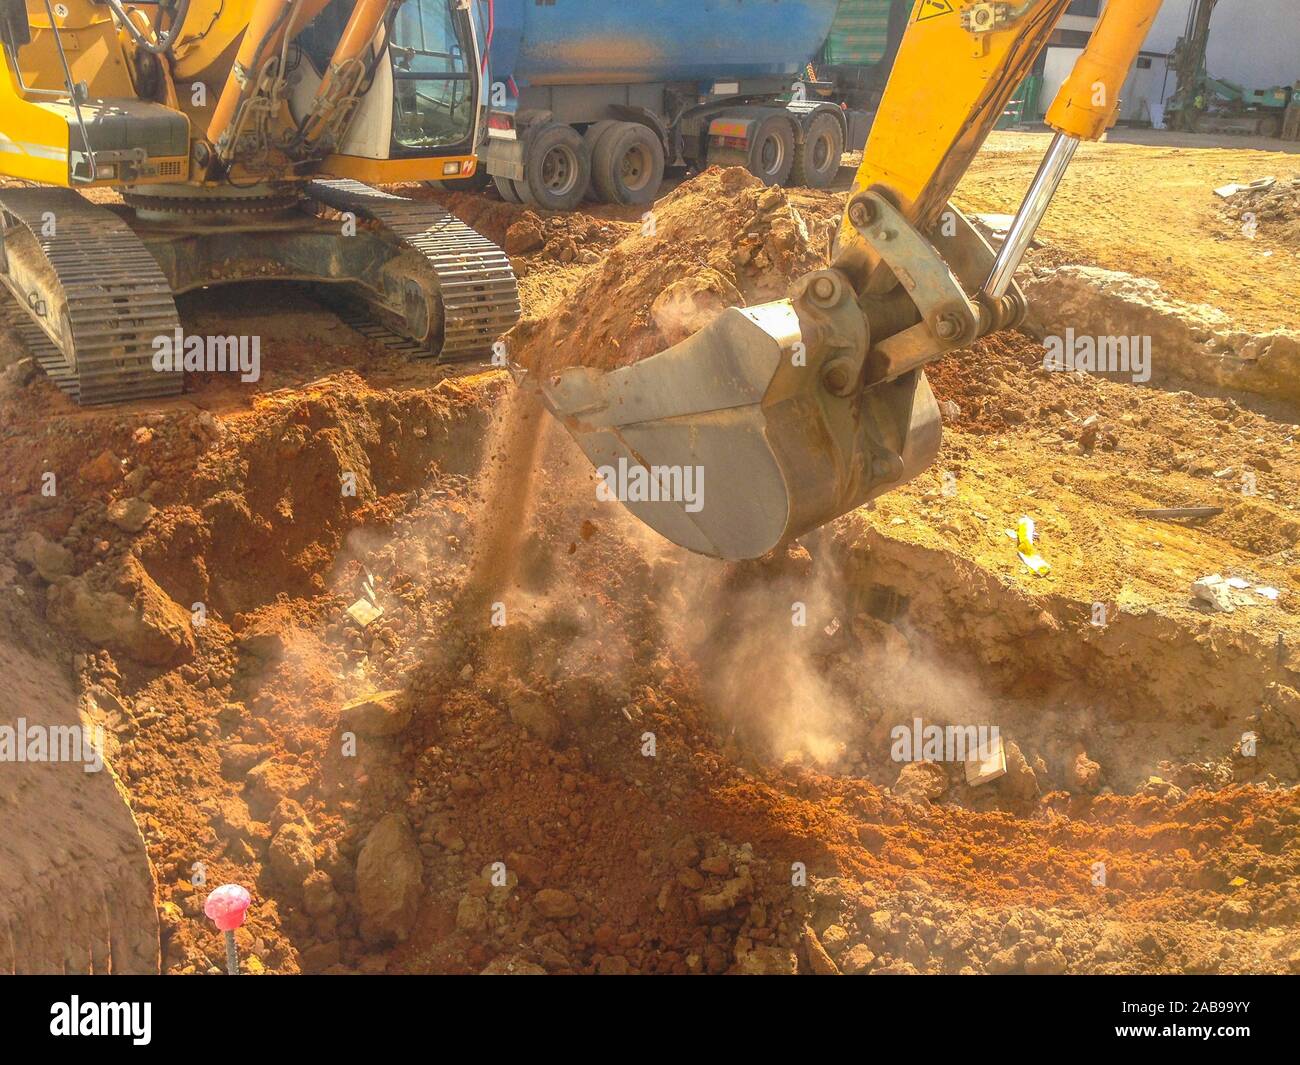 Excavator loading the ground plot at construction site. Dump truck waiting close. Stock Photo